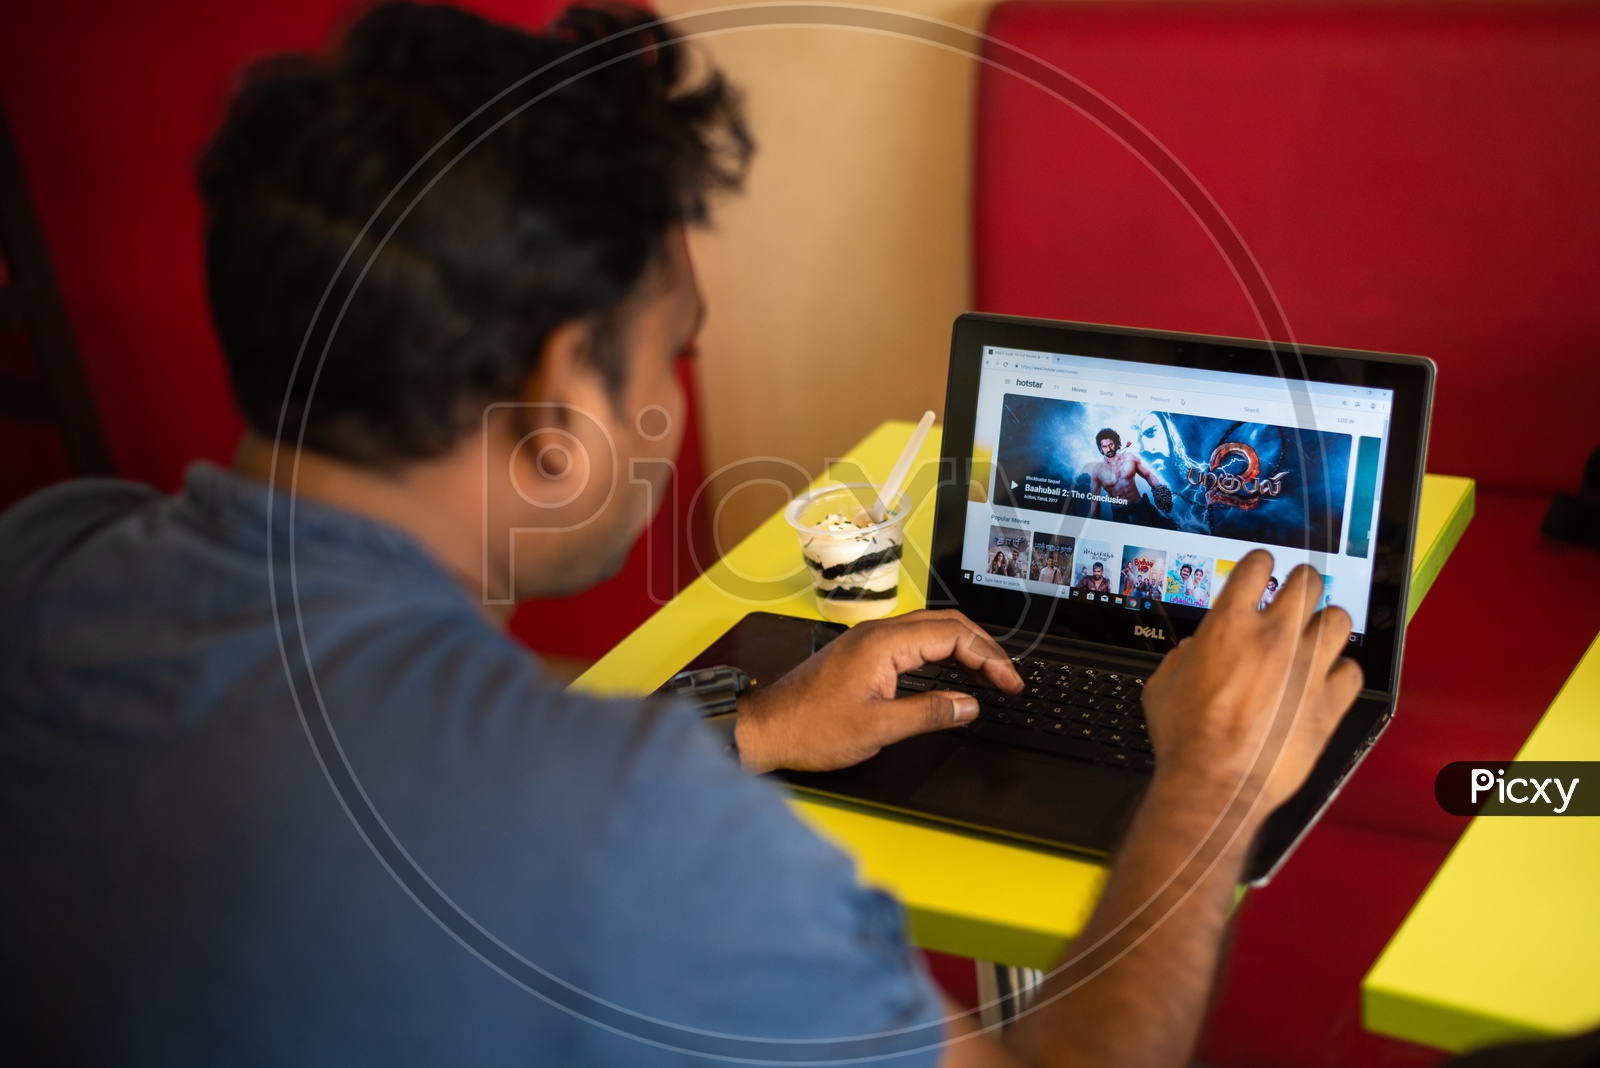 Indian youth using Hotstar Online streaming website on a Laptop / PC